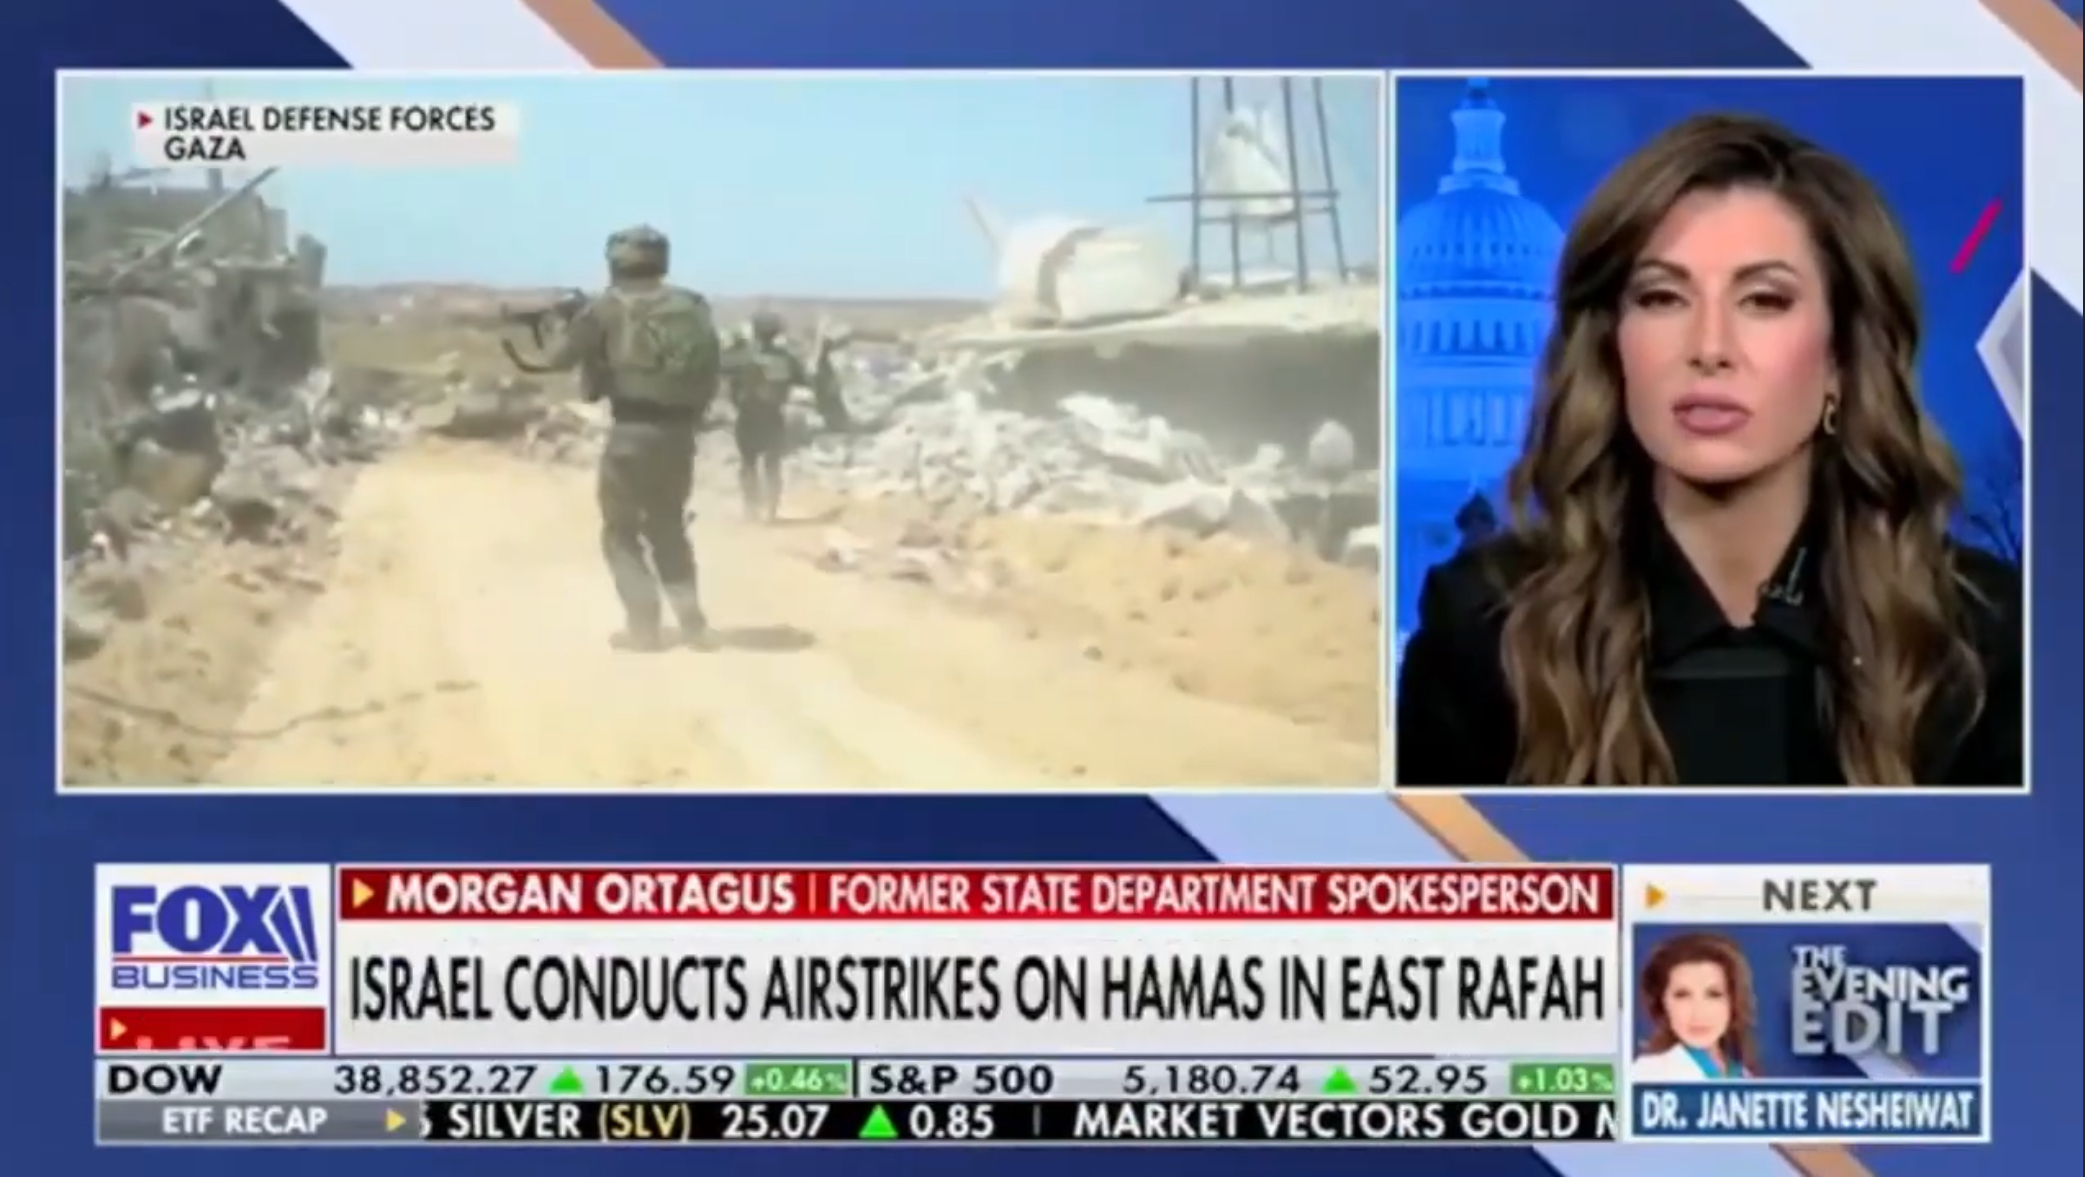 Morgan Ortagus joins The Evening Edit on Fox Business